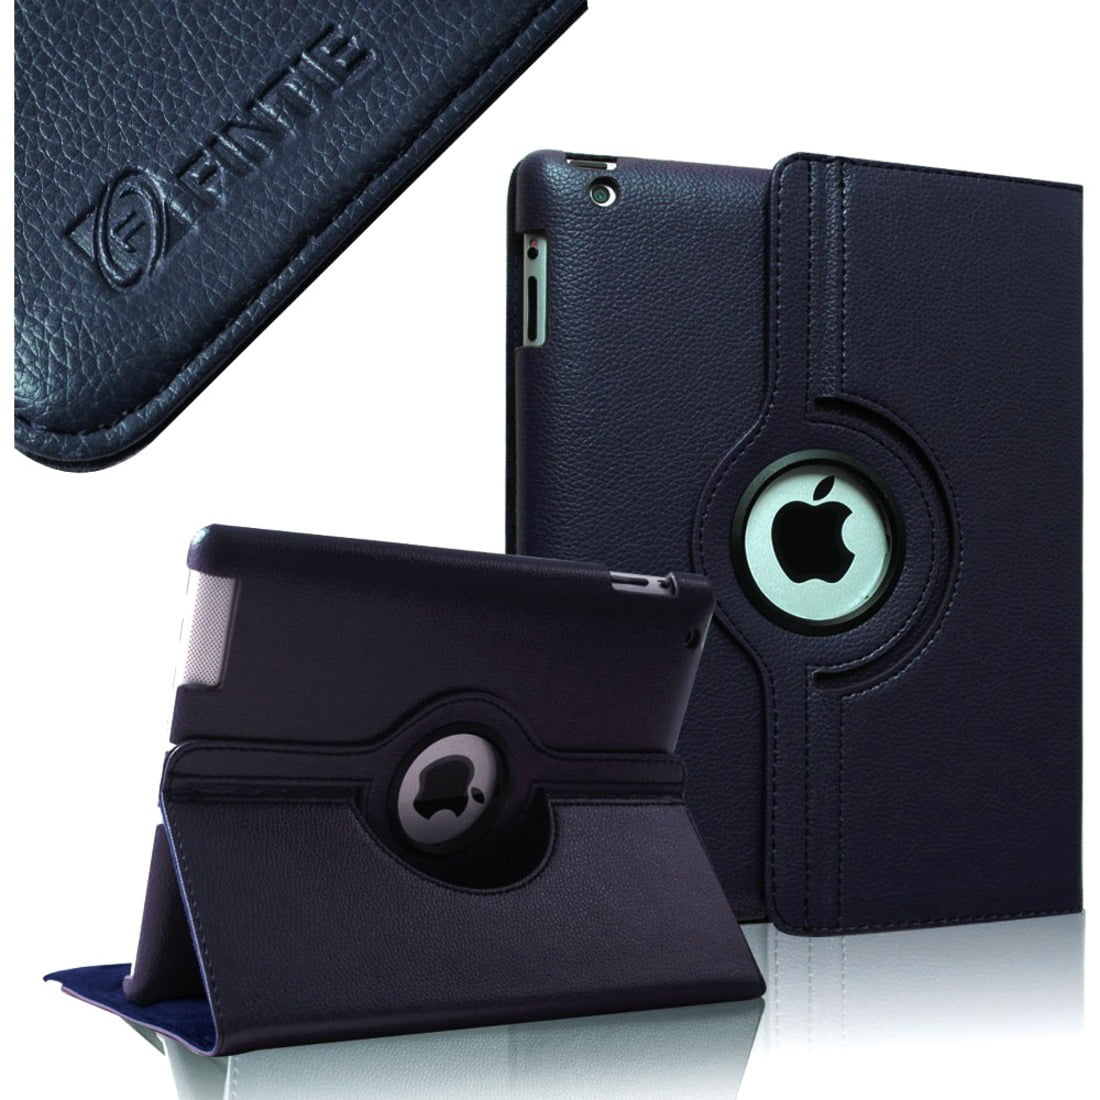 Wallet and Flip Stand With Built-in Magnet For Sleep G4GADGET® New Premium Folio Black Mixed Leather Case iPad 3 & iPad 2 Wake Feature for Apple iPad 4 Cover